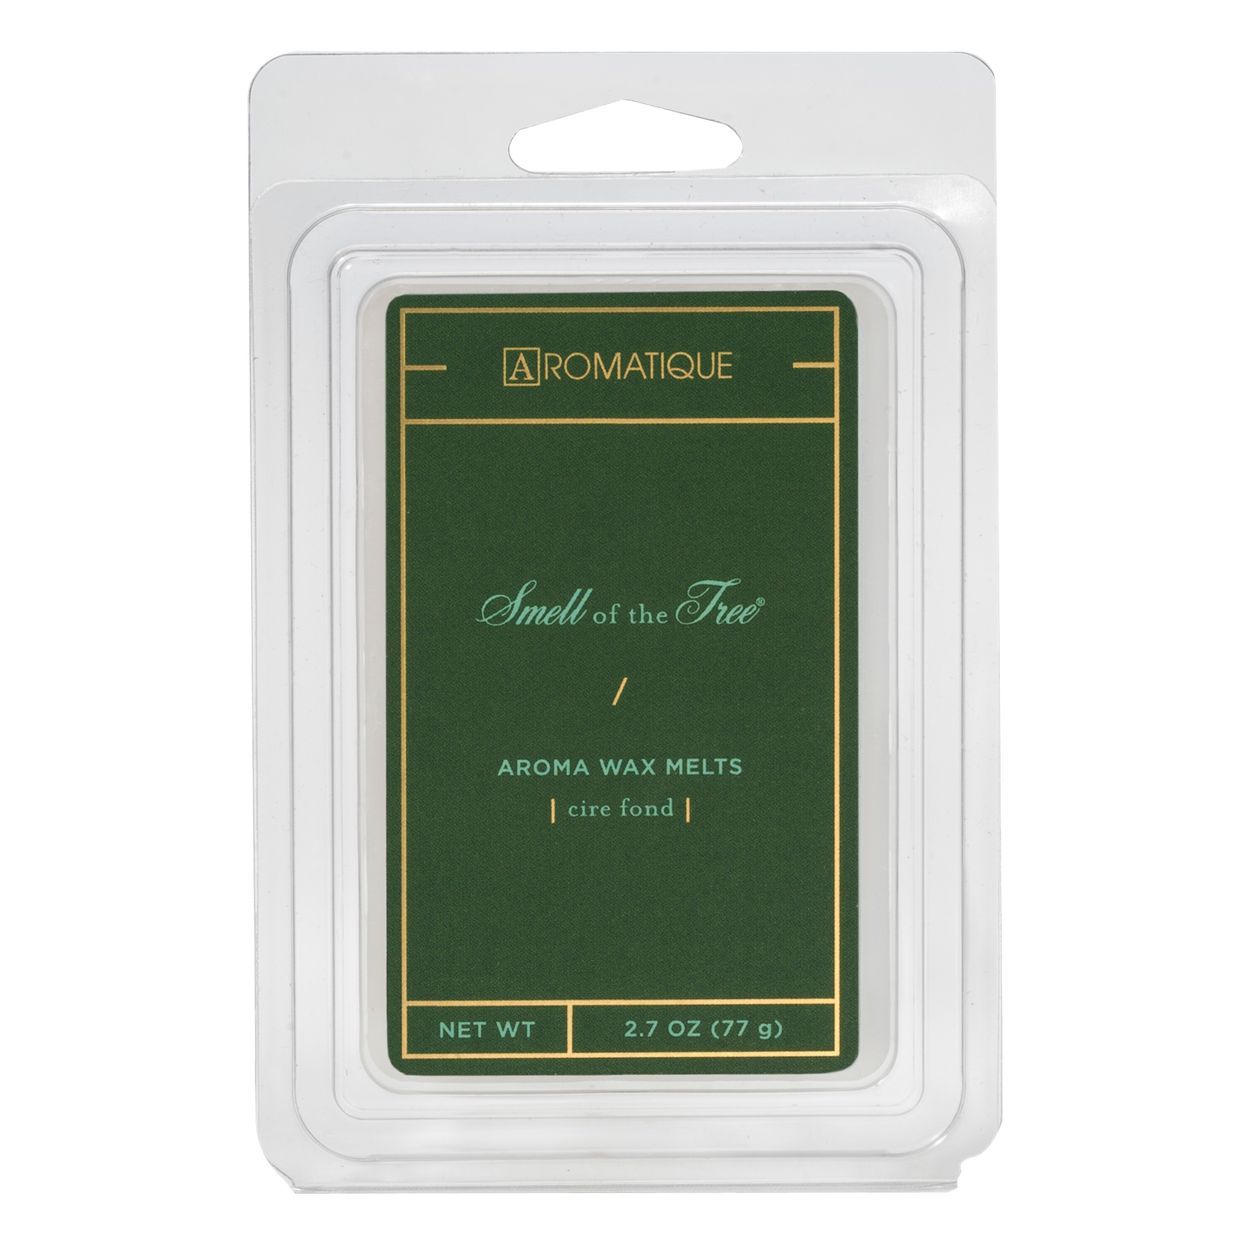 SMELL OF THE TREE WAX MELT by Aromatique